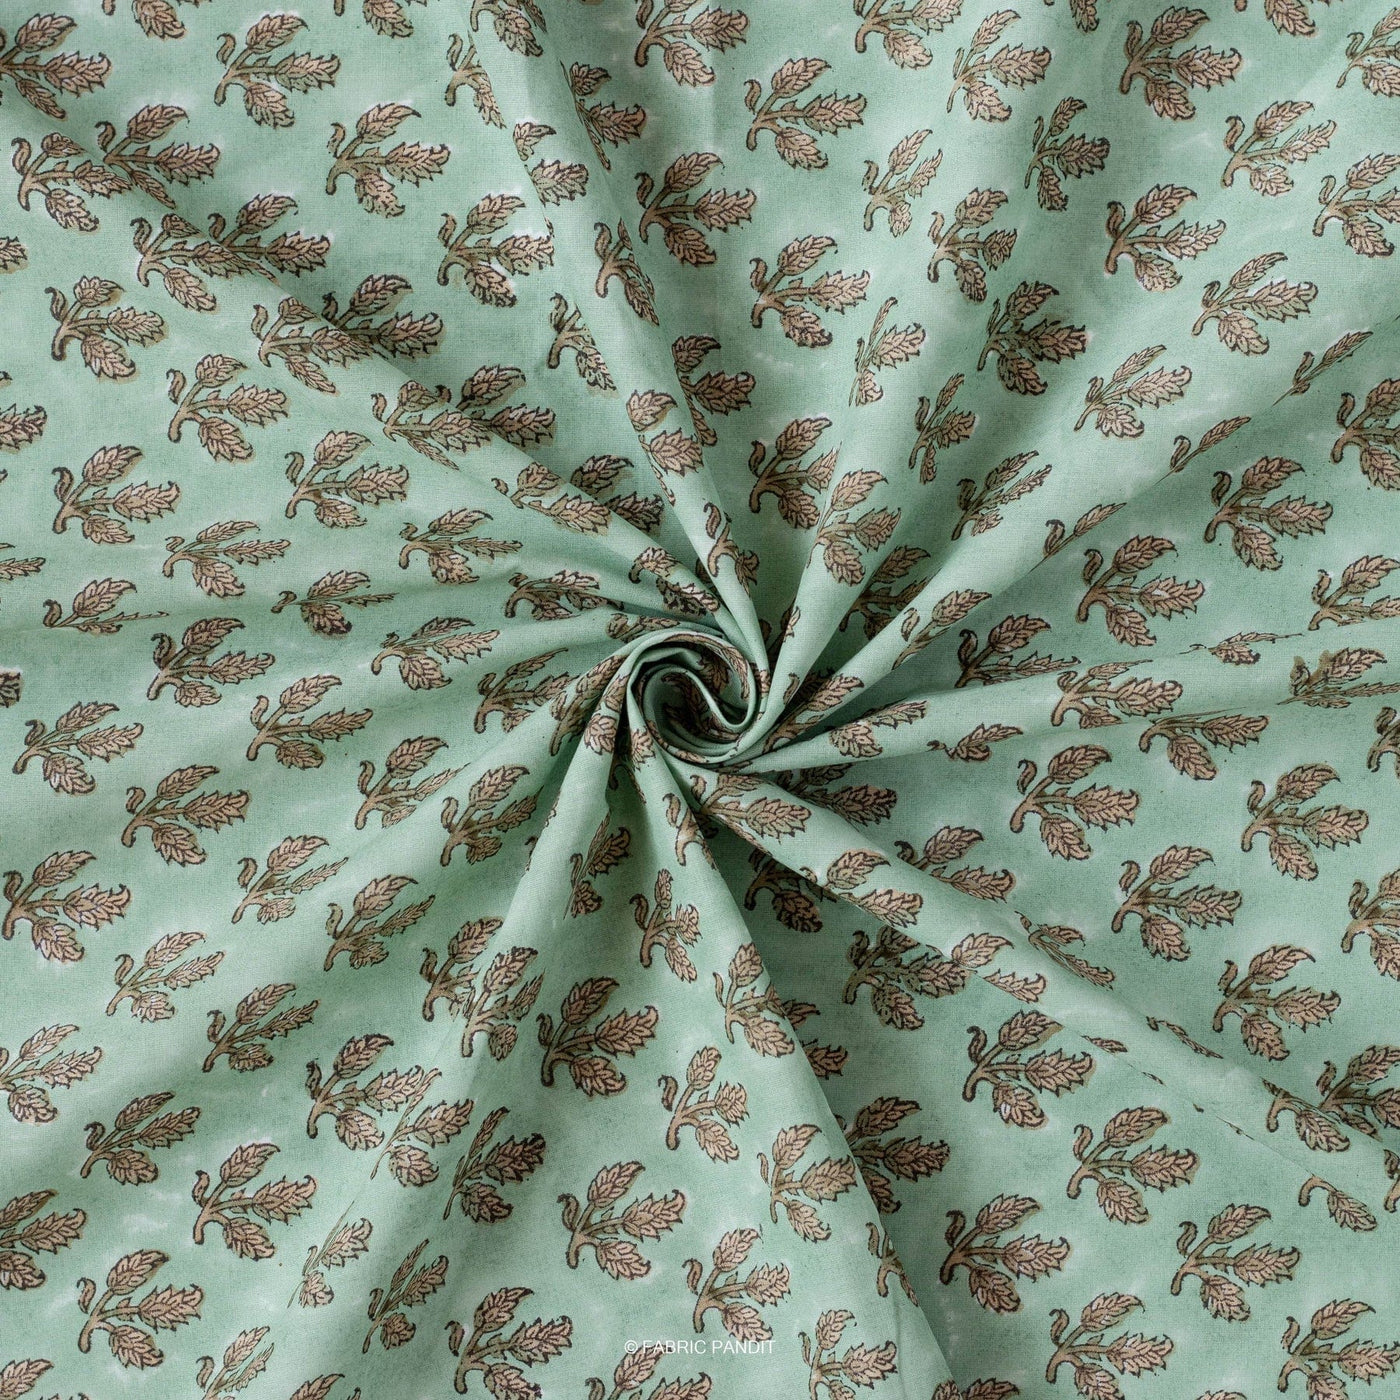 Hand Block Printed Cotton Fabric Cut Piece (CUT PIECE) Sea Green & Brown Dried Leaves Hand Block Printed Pure Cotton Fabric (Width 44 Inches)